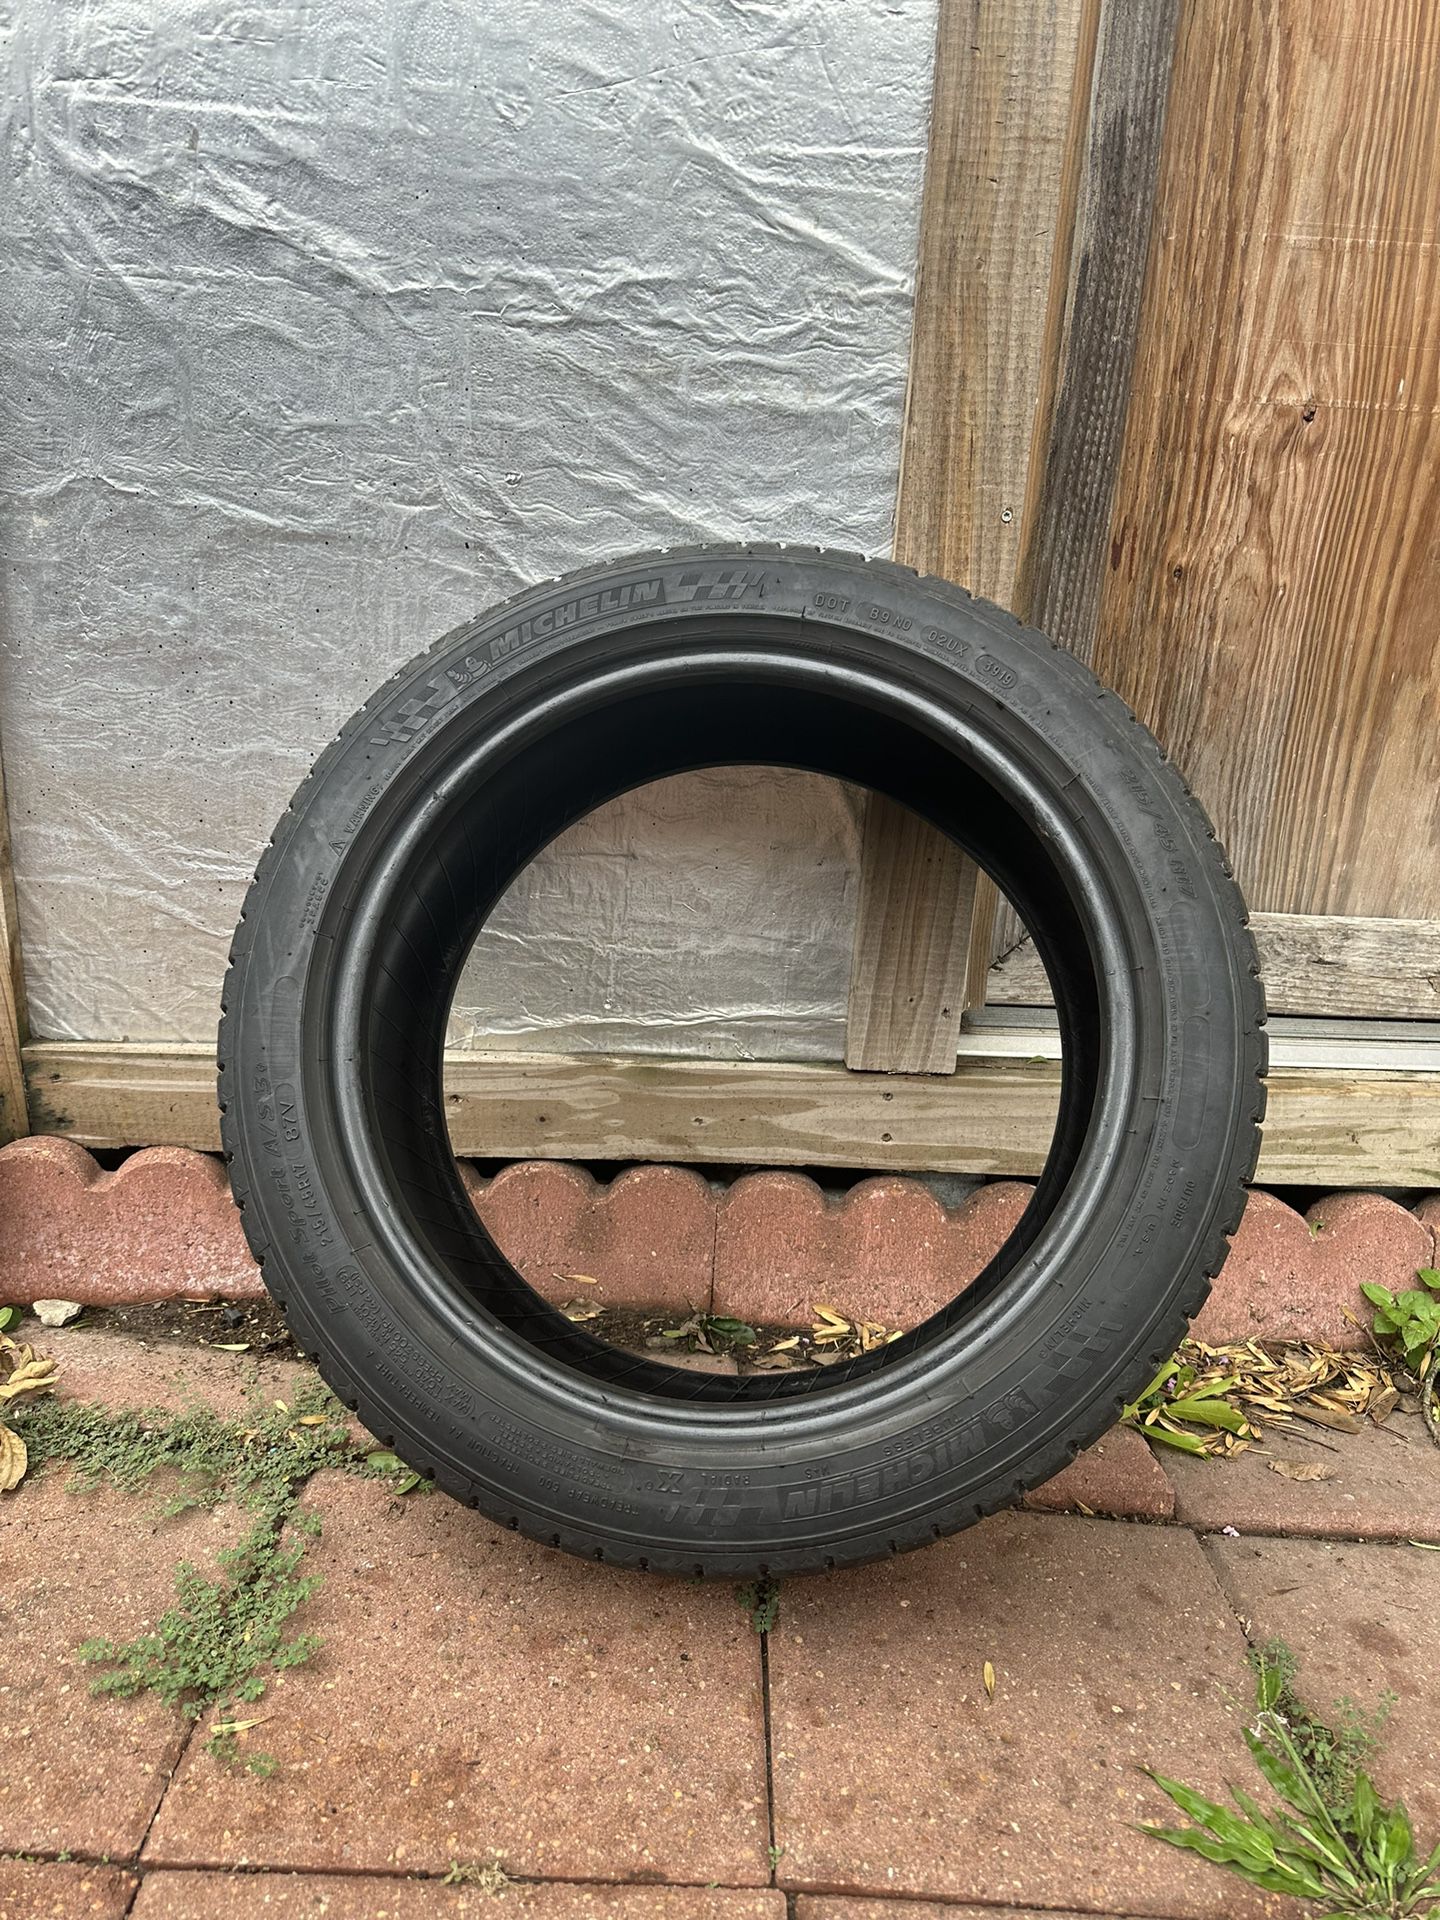 Used Tire 